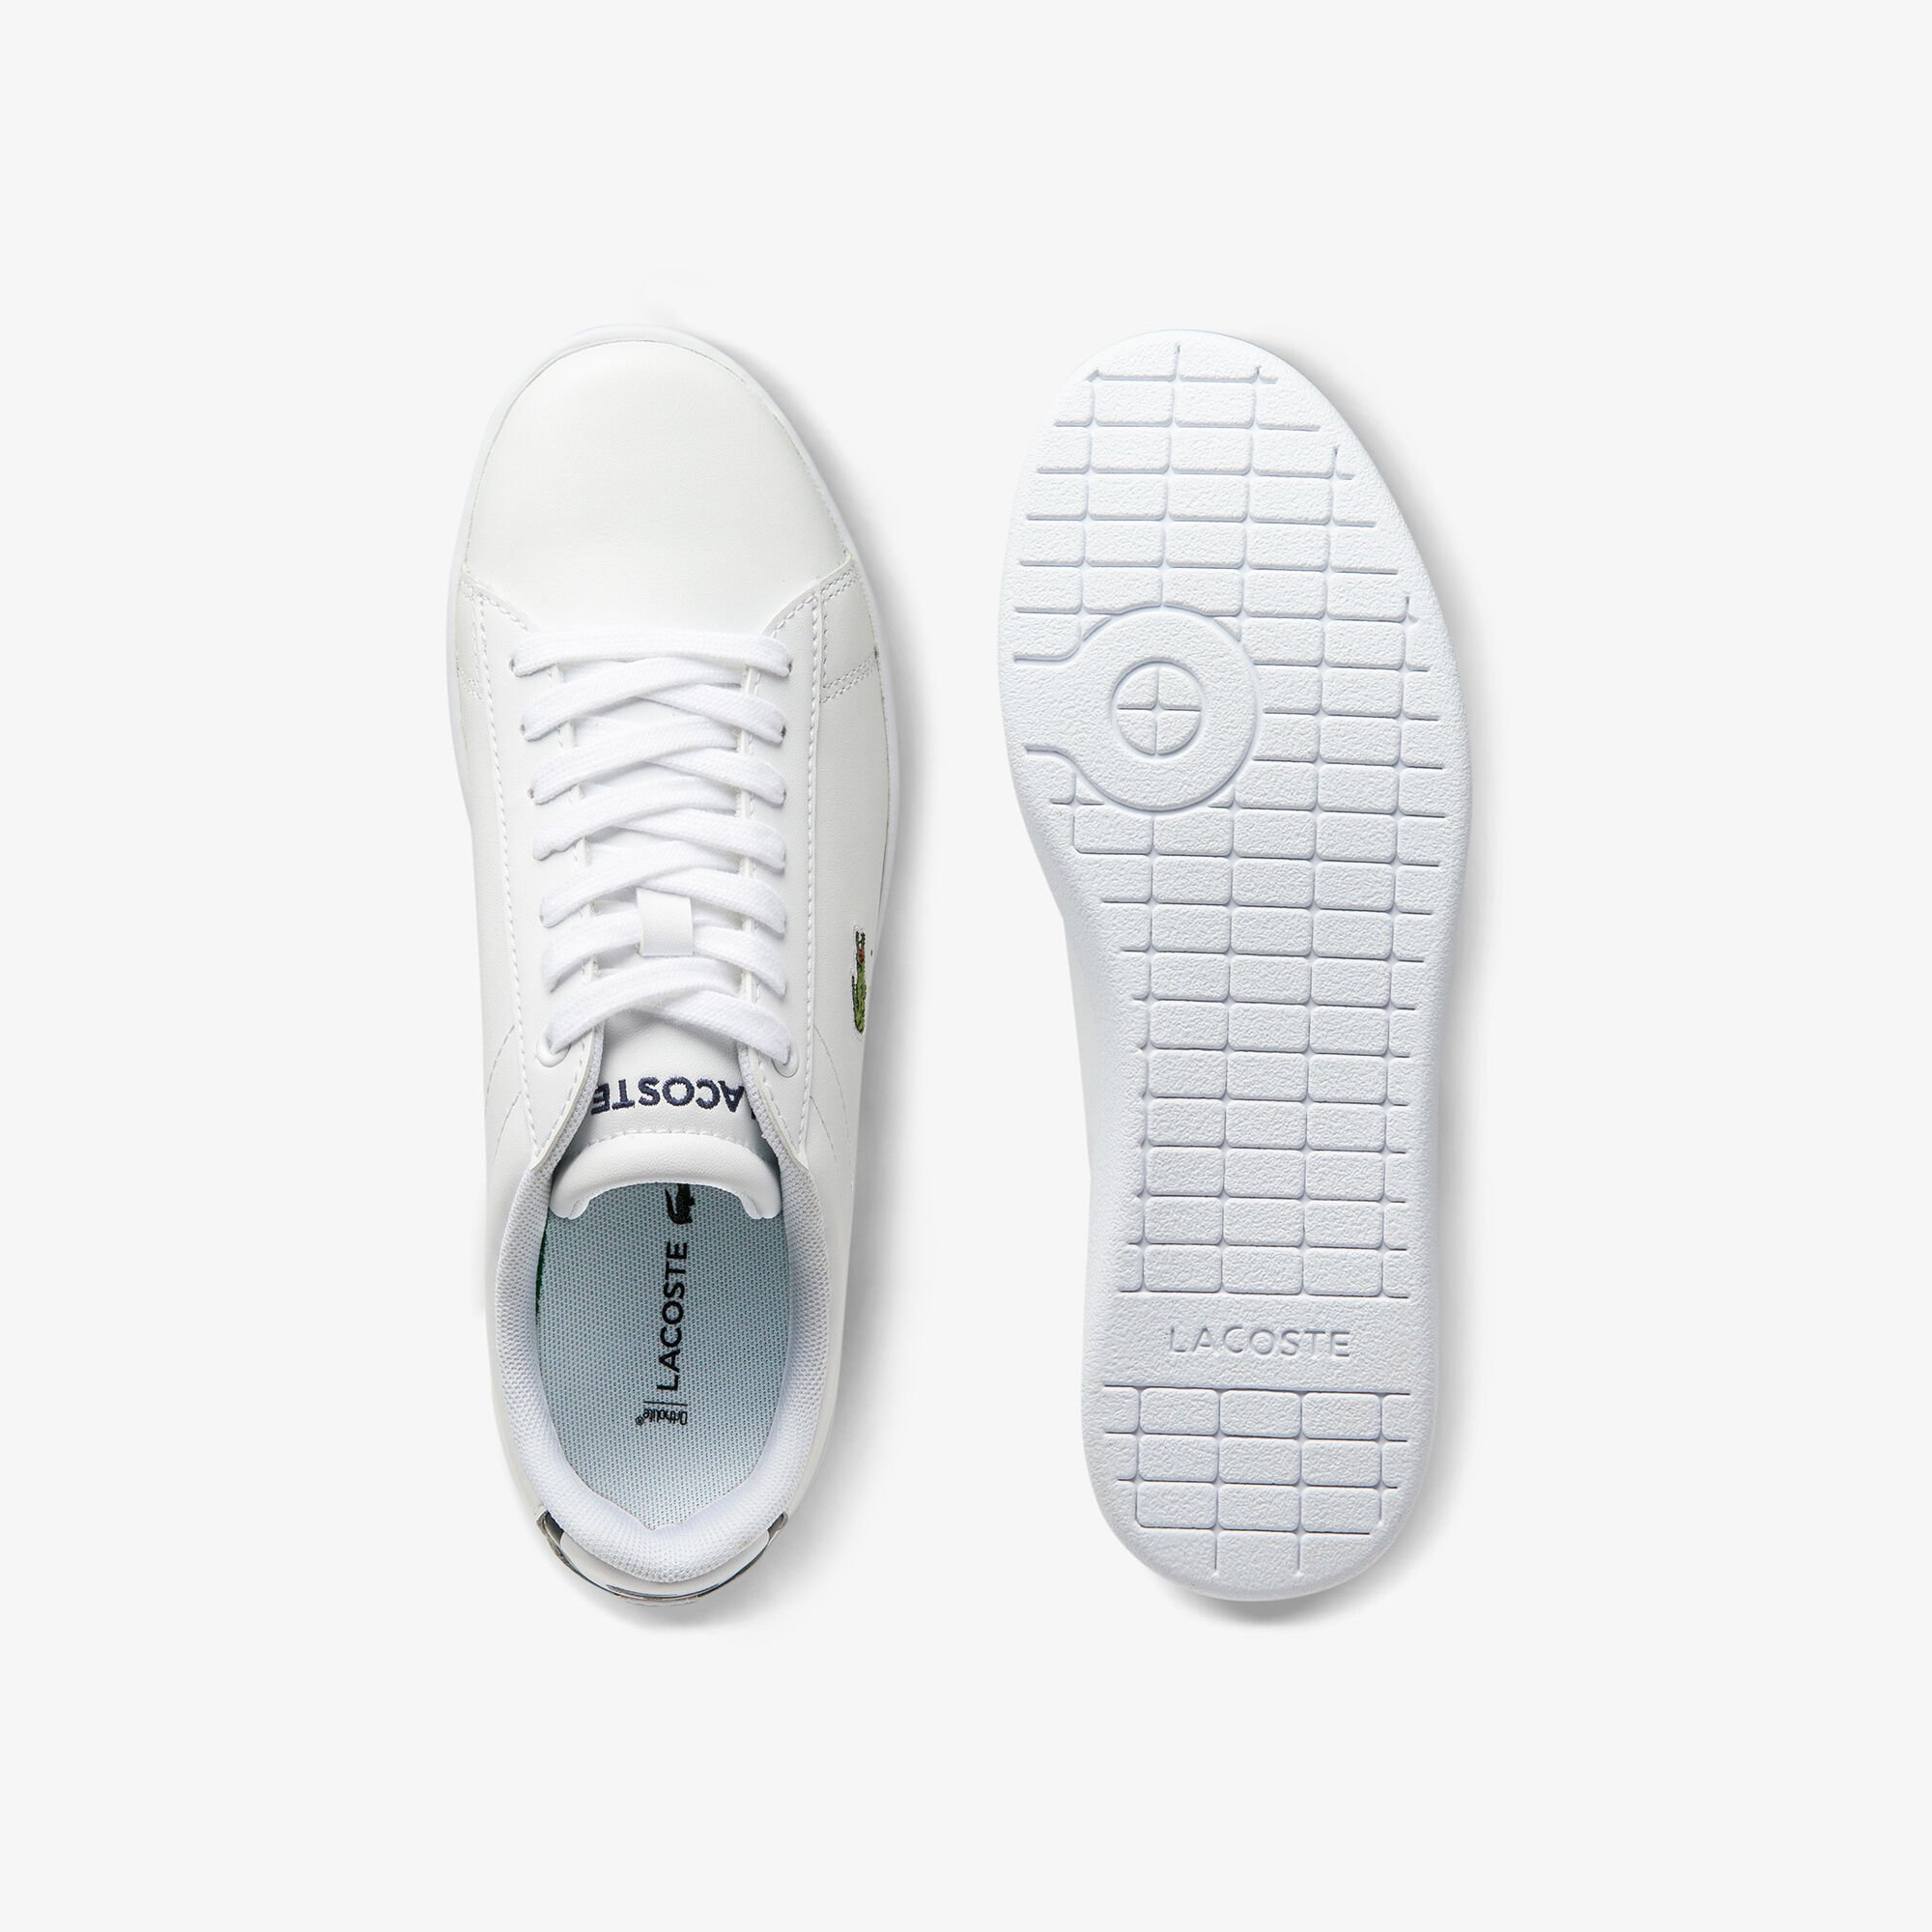 Women's Carnaby Evo Mesh-lined Leather Trainers